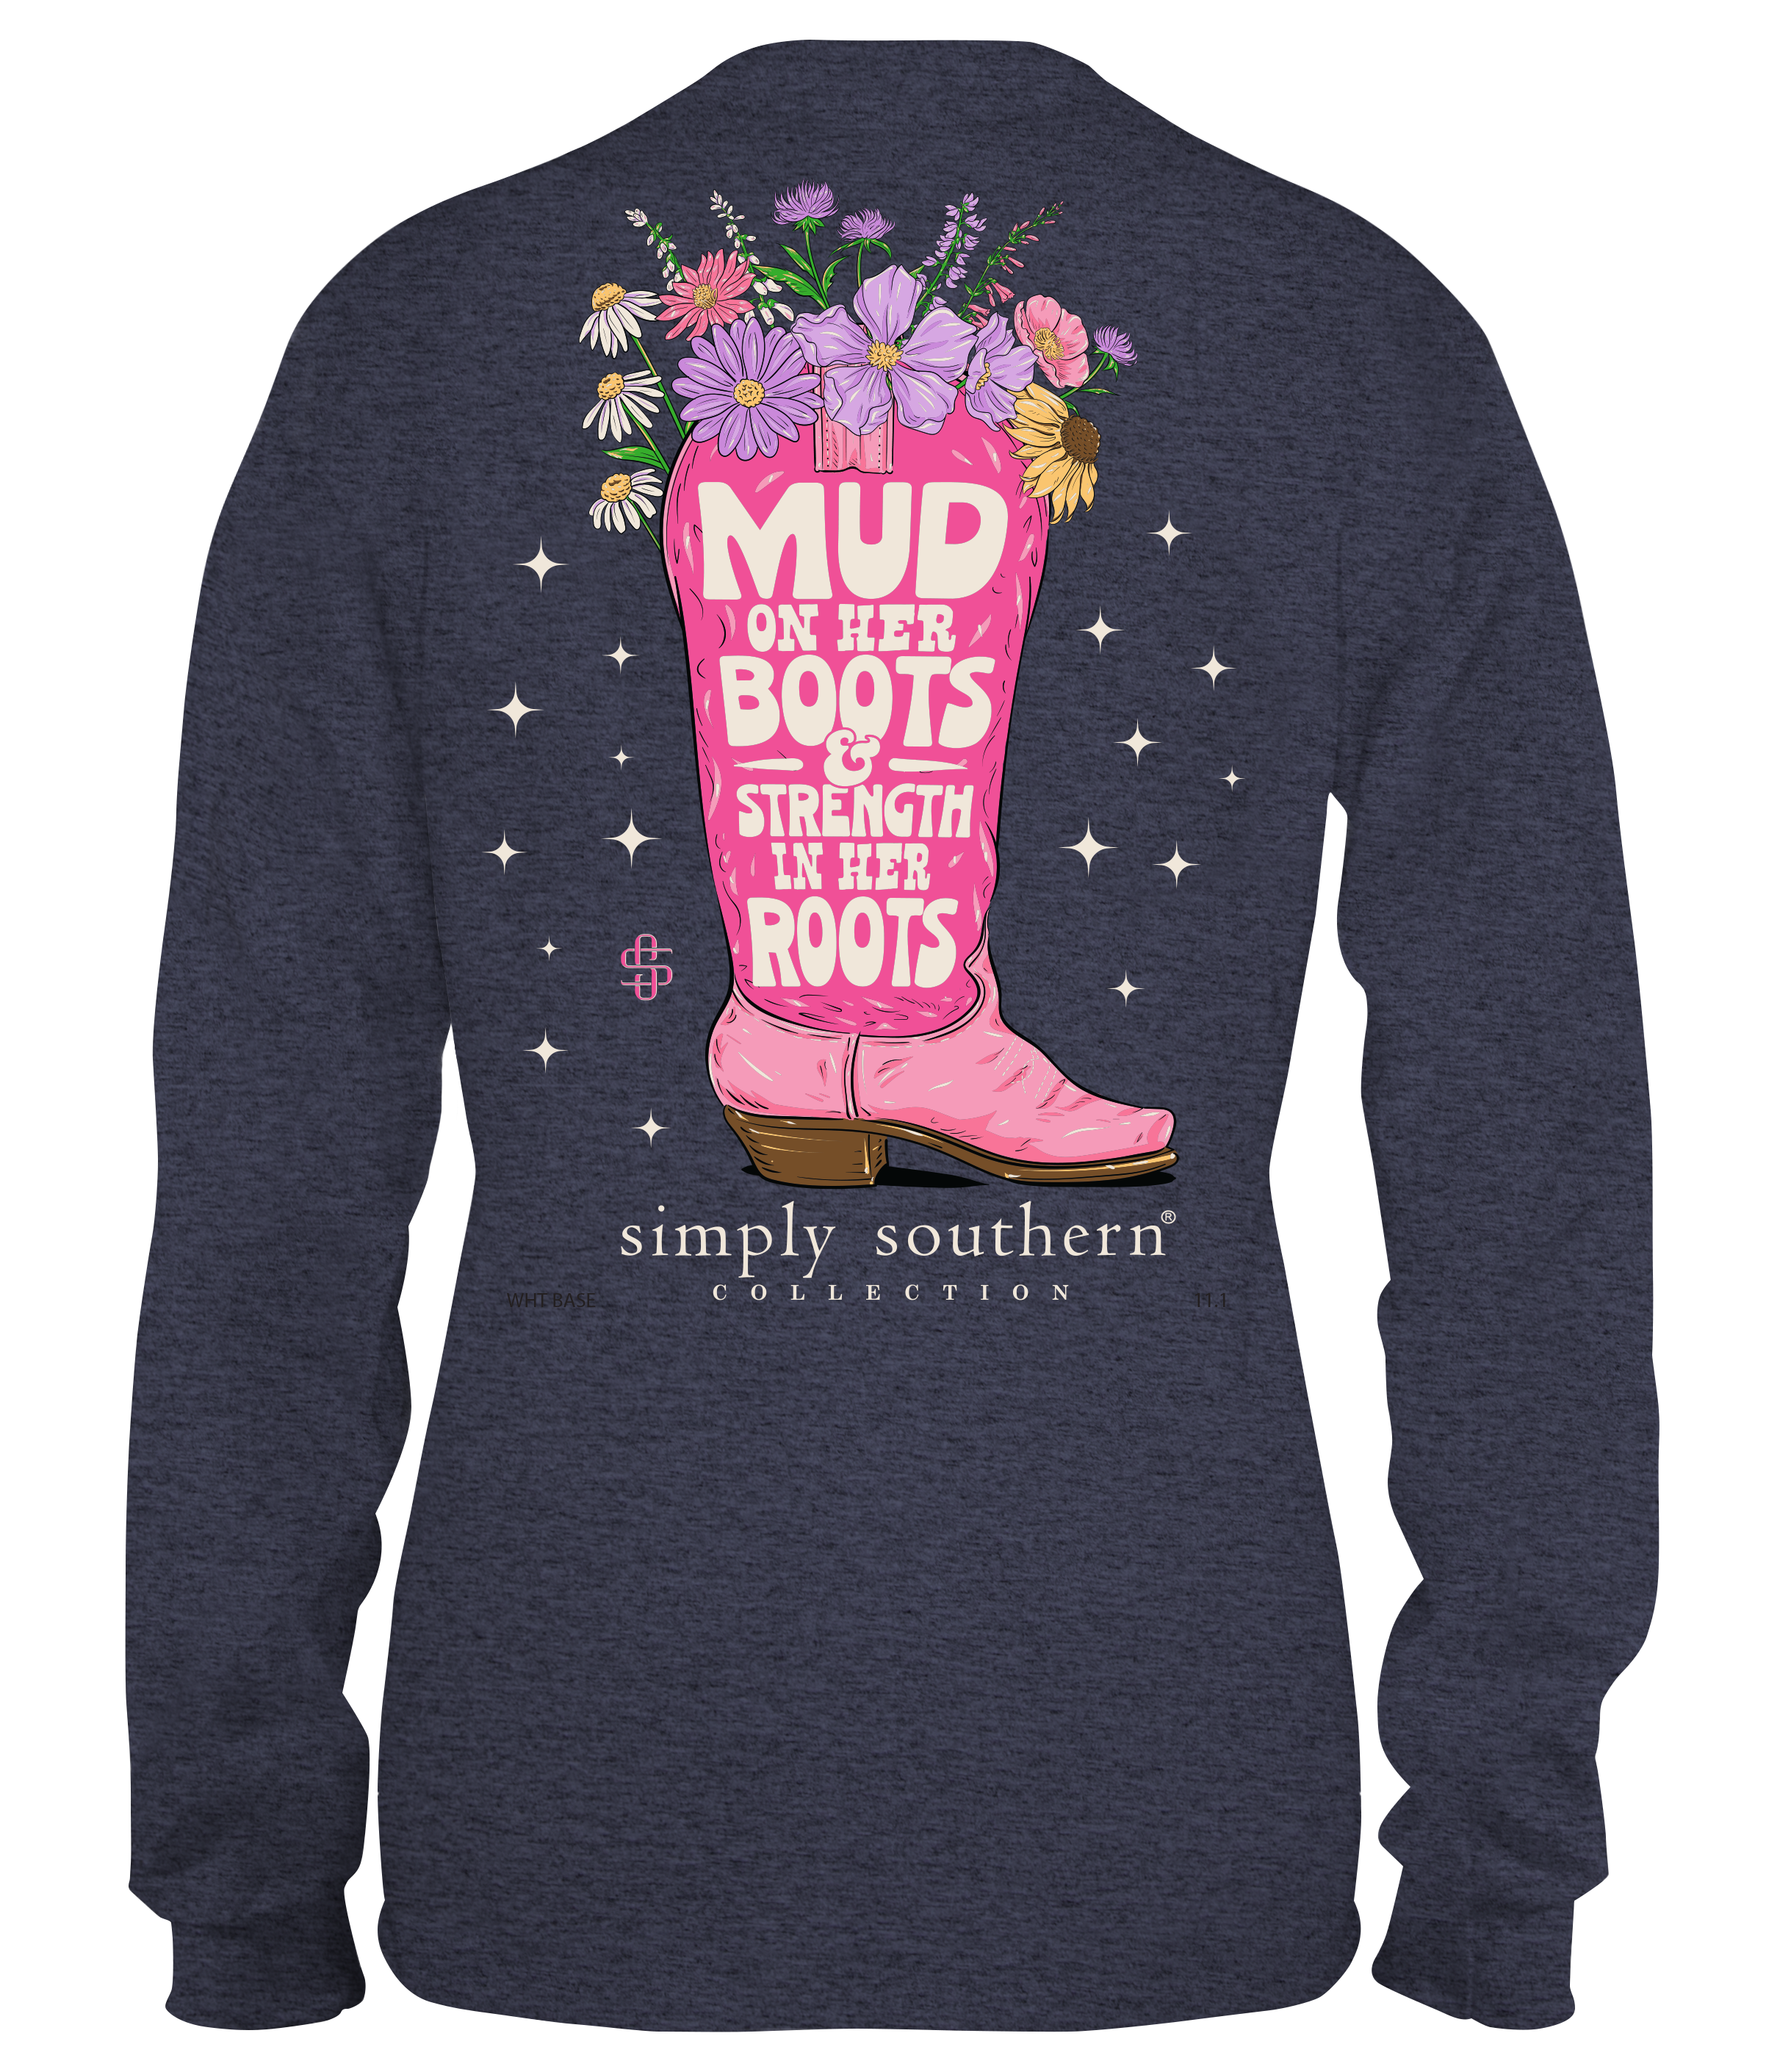 'Mud On Her Boots' Long Sleeve Tee by Simply Southern